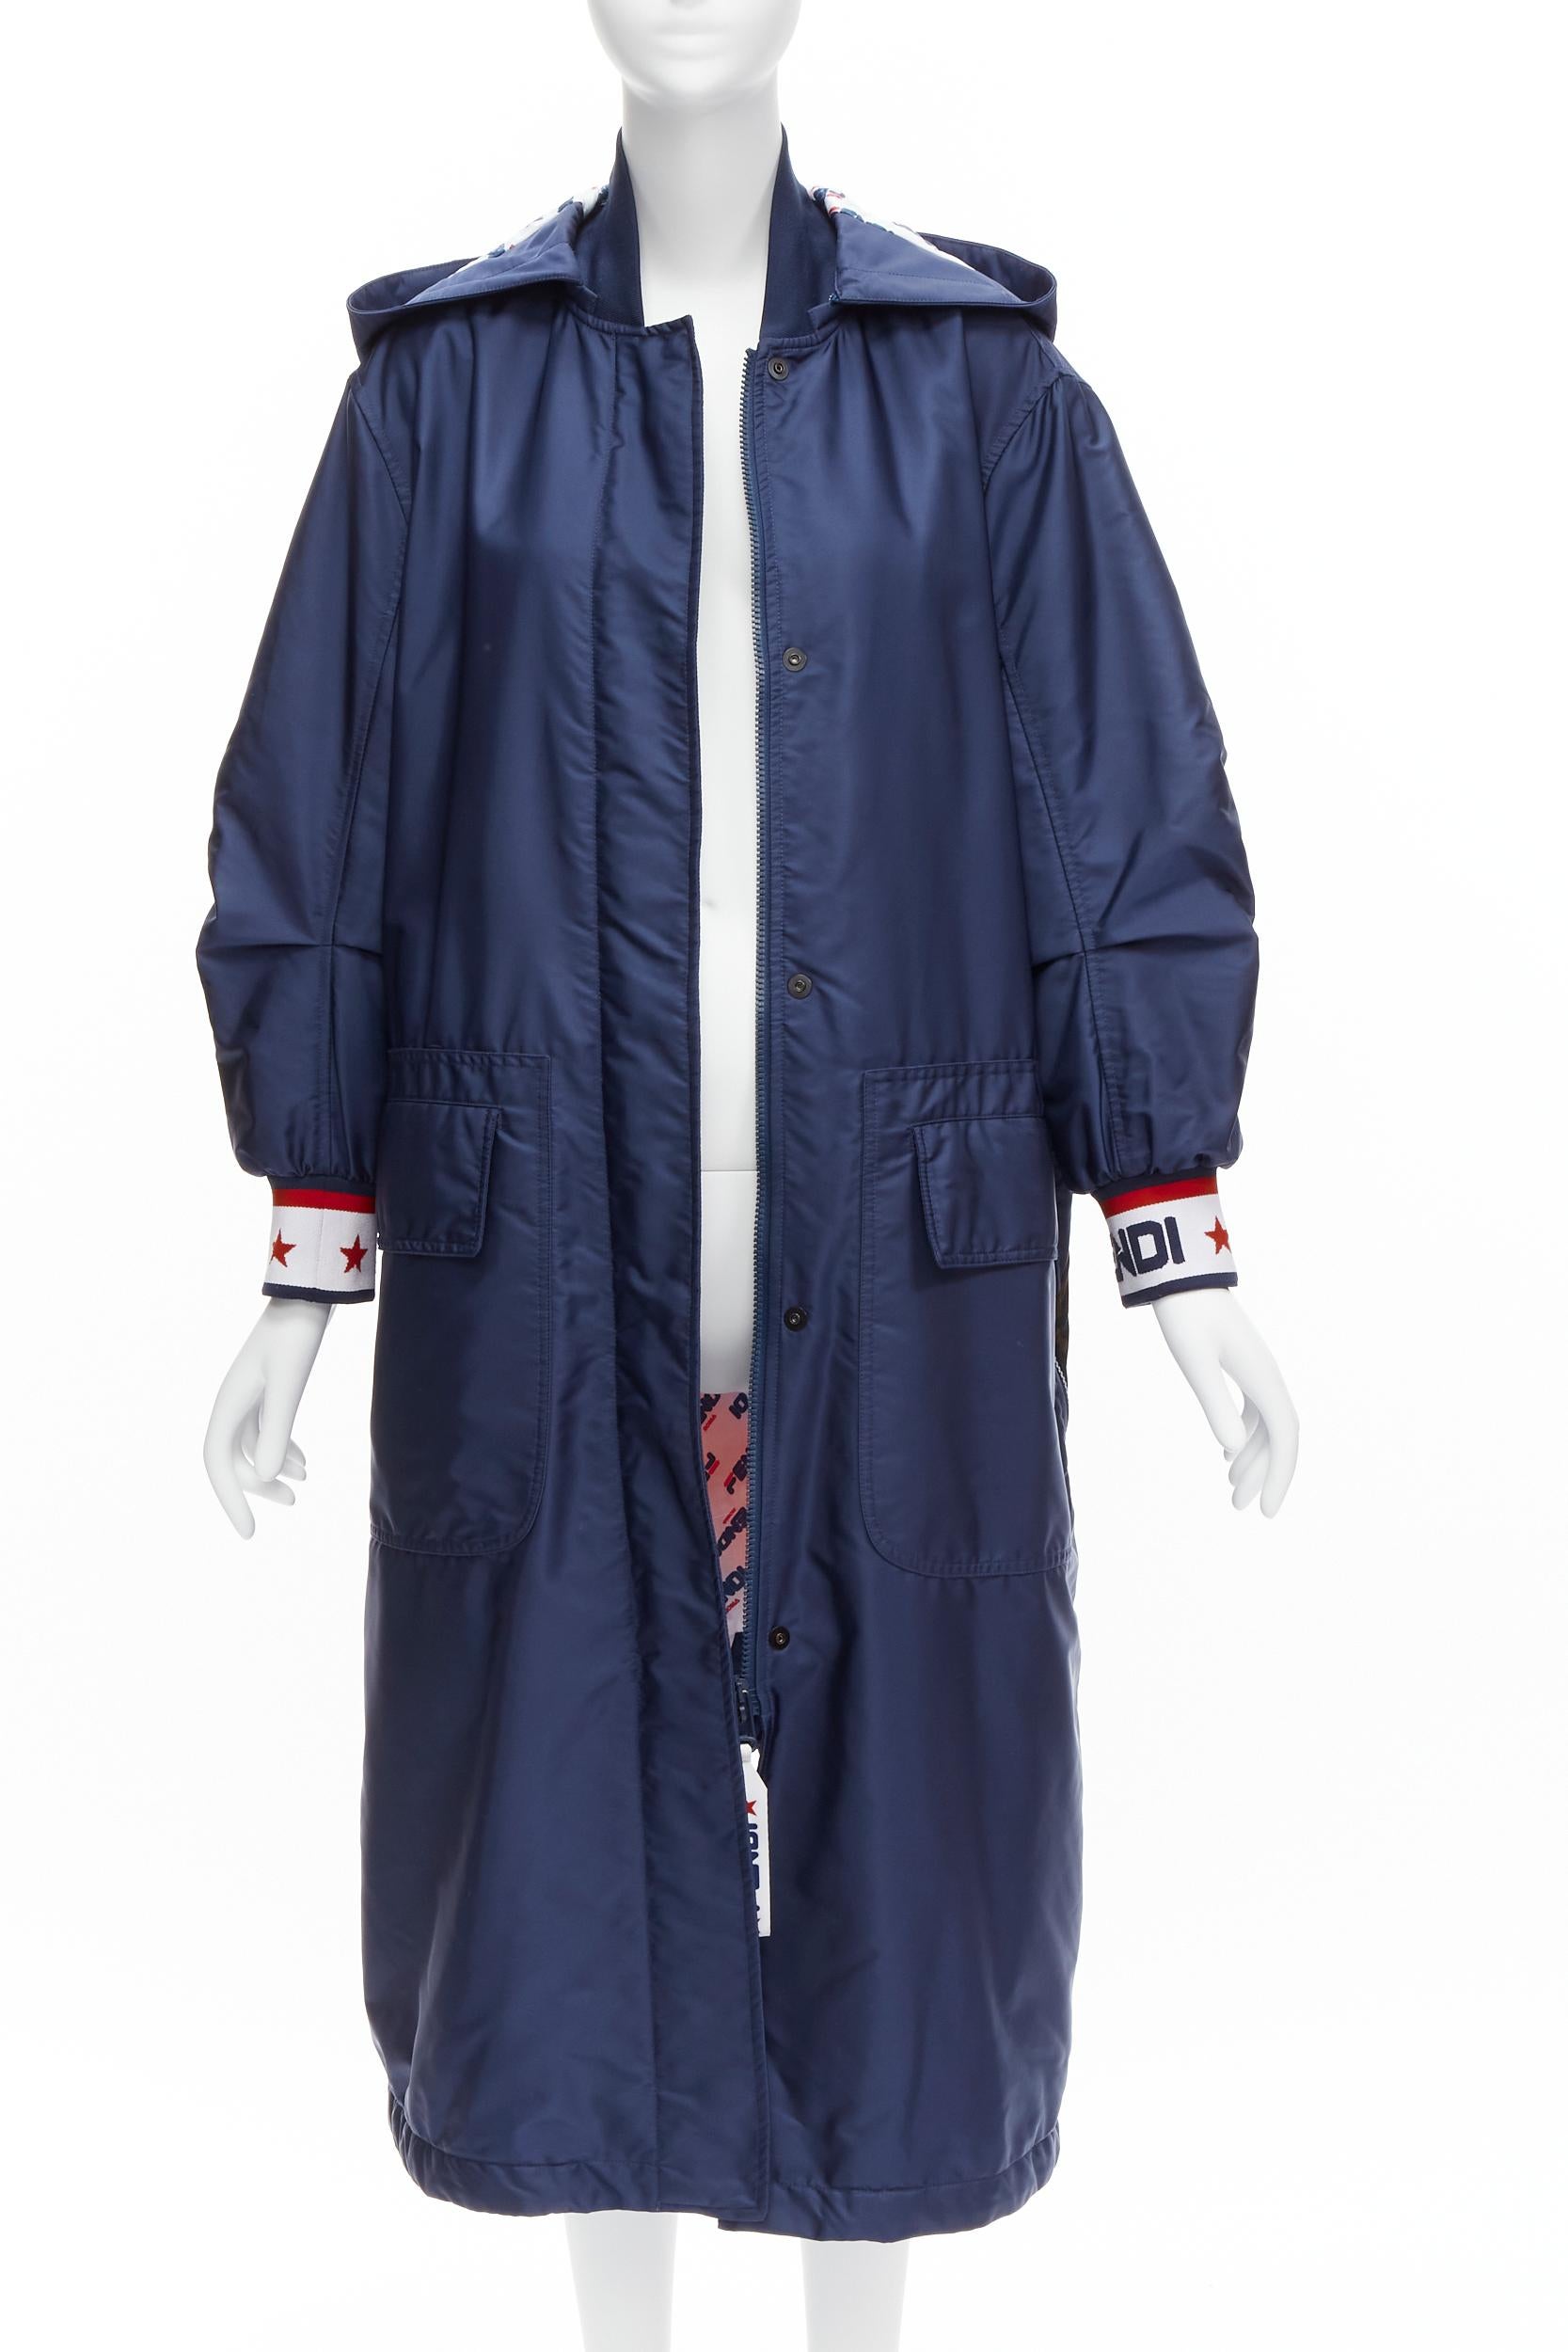 FENDI FILA 2018 Runway oversized logo navy nylon hooded padded coat S
Reference: TGAS/D00142
Brand: Fendi
Collection: Fila 2018 - Runway
Material: Polyamide
Color: Navy, Multicolour
Pattern: Solid
Closure: Zip
Lining: Multicolour Fabric
Extra